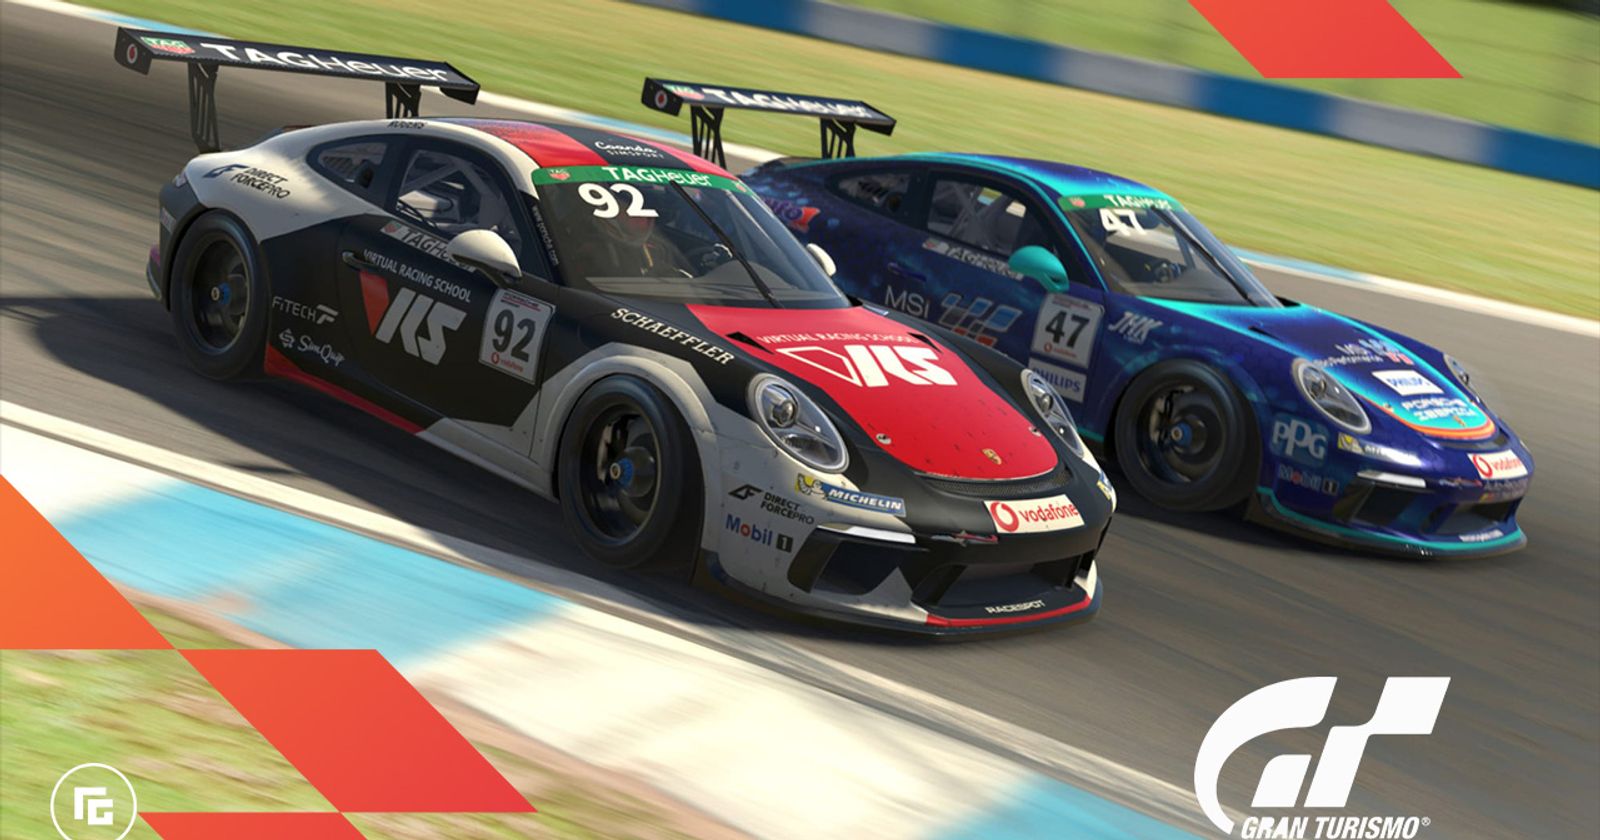 Gran Turismo 7' release time, Metacritic score, pre-order details, and file  size